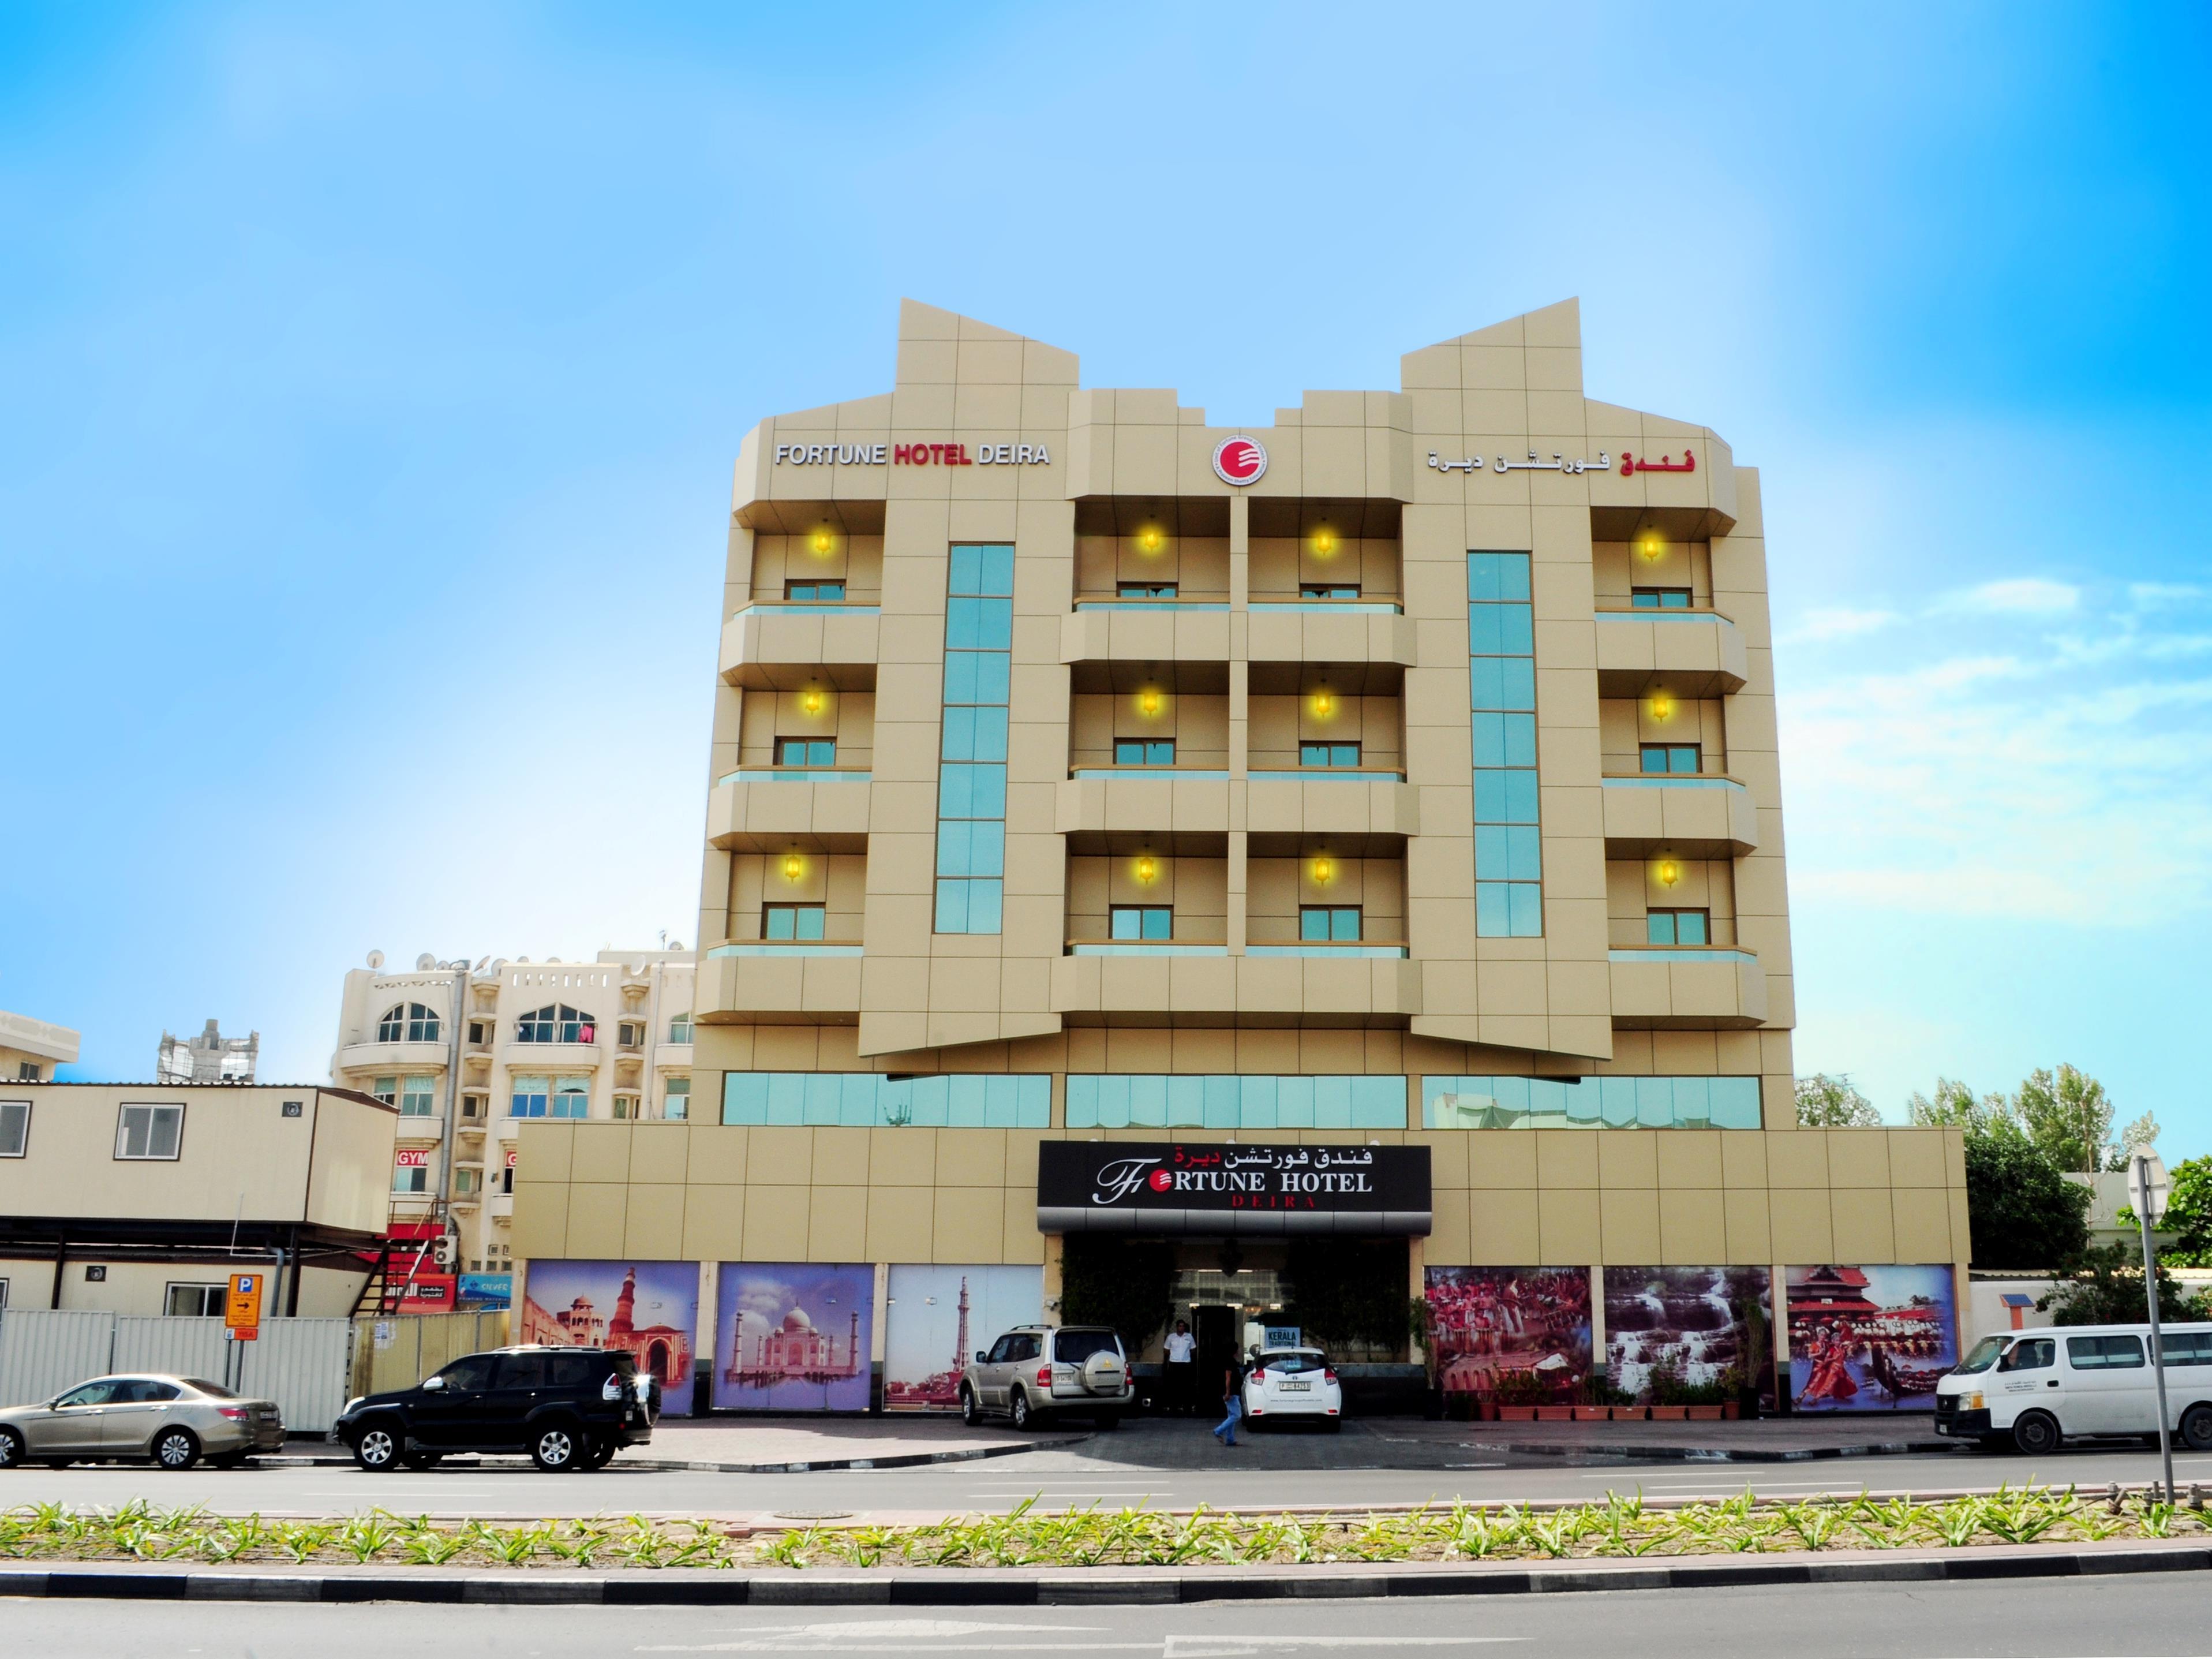 Fortune Hotel Deira Emirate of Dubai FAQ 2016, What facilities are there in Fortune Hotel Deira Emirate of Dubai 2016, What Languages Spoken are Supported in Fortune Hotel Deira Emirate of Dubai 2016, Which payment cards are accepted in Fortune Hotel Deira Emirate of Dubai , Emirate of Dubai Fortune Hotel Deira room facilities and services Q&A 2016, Emirate of Dubai Fortune Hotel Deira online booking services 2016, Emirate of Dubai Fortune Hotel Deira address 2016, Emirate of Dubai Fortune Hotel Deira telephone number 2016,Emirate of Dubai Fortune Hotel Deira map 2016, Emirate of Dubai Fortune Hotel Deira traffic guide 2016, how to go Emirate of Dubai Fortune Hotel Deira, Emirate of Dubai Fortune Hotel Deira booking online 2016, Emirate of Dubai Fortune Hotel Deira room types 2016.